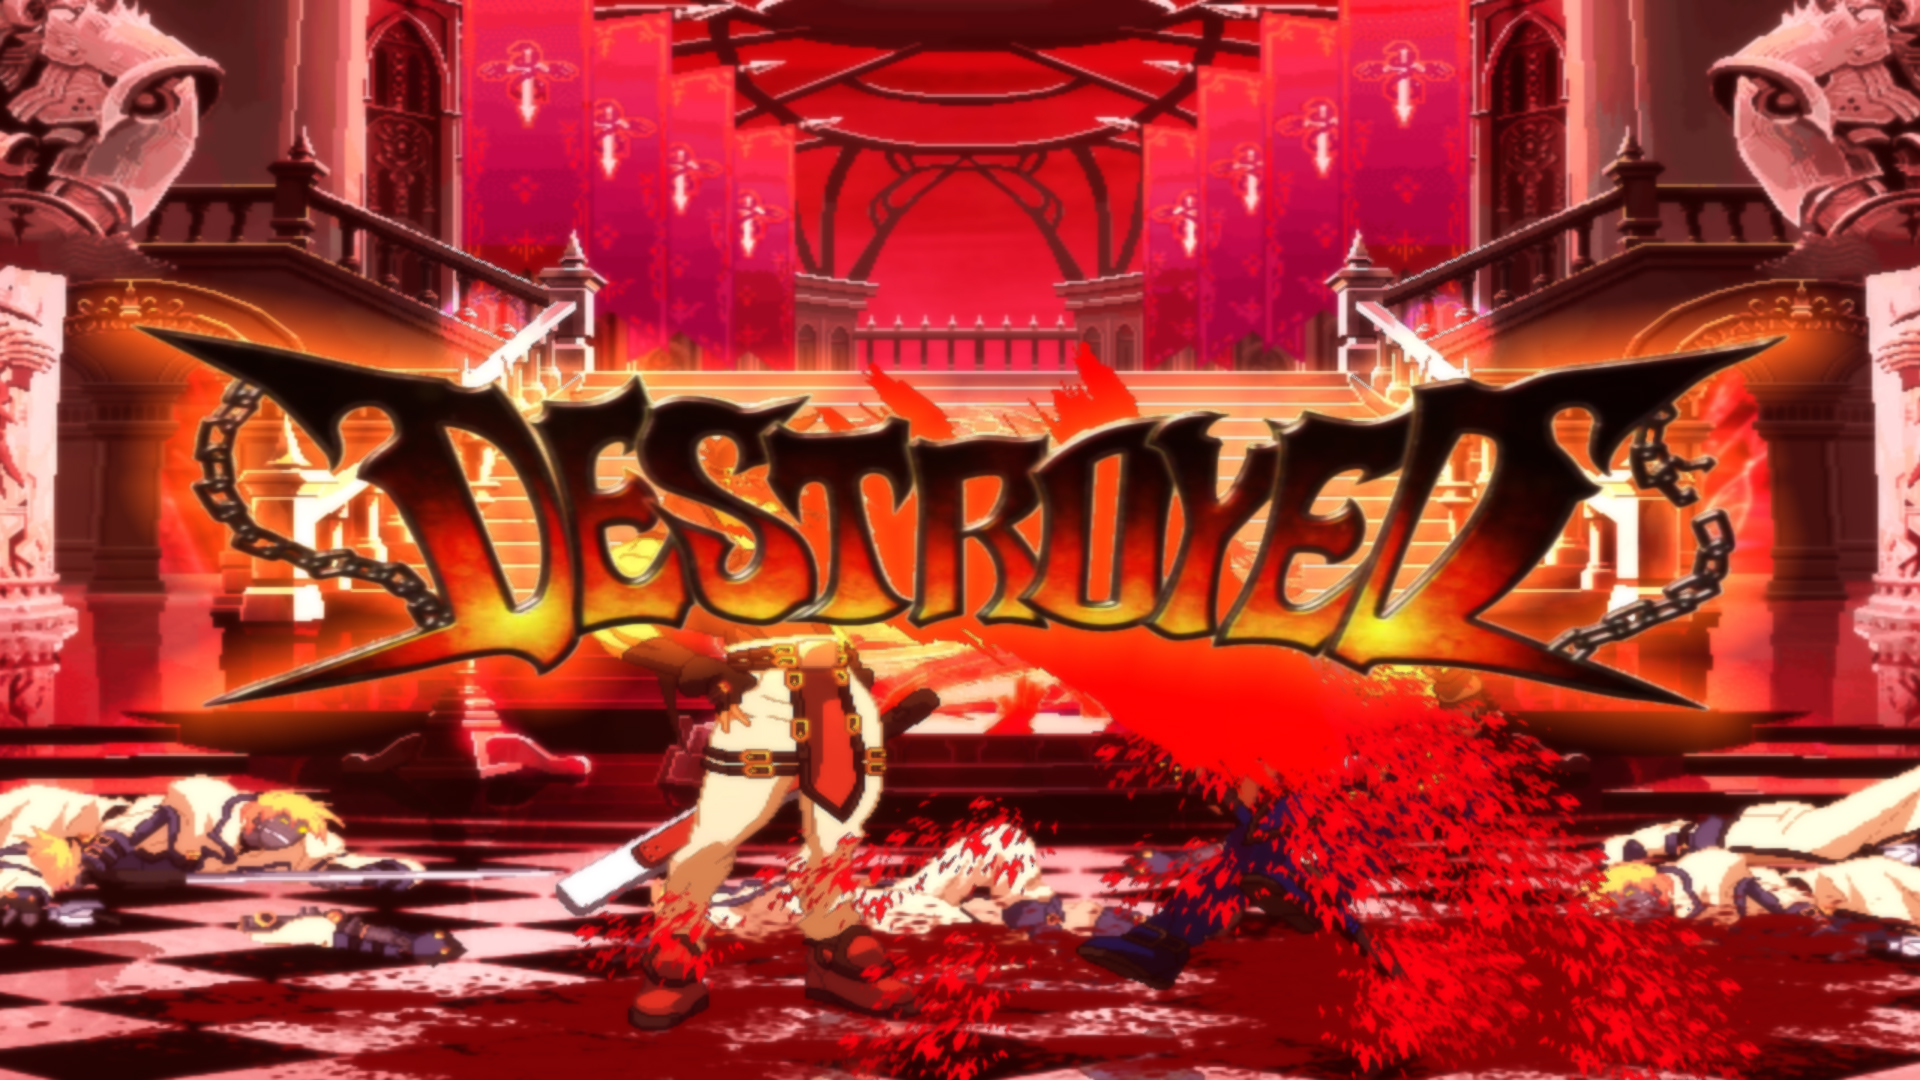 Guilty Gear XX Bloodshed Type OD+ By VGames Updated (21.08.18) Mugen_2018-08-19_13-16-23